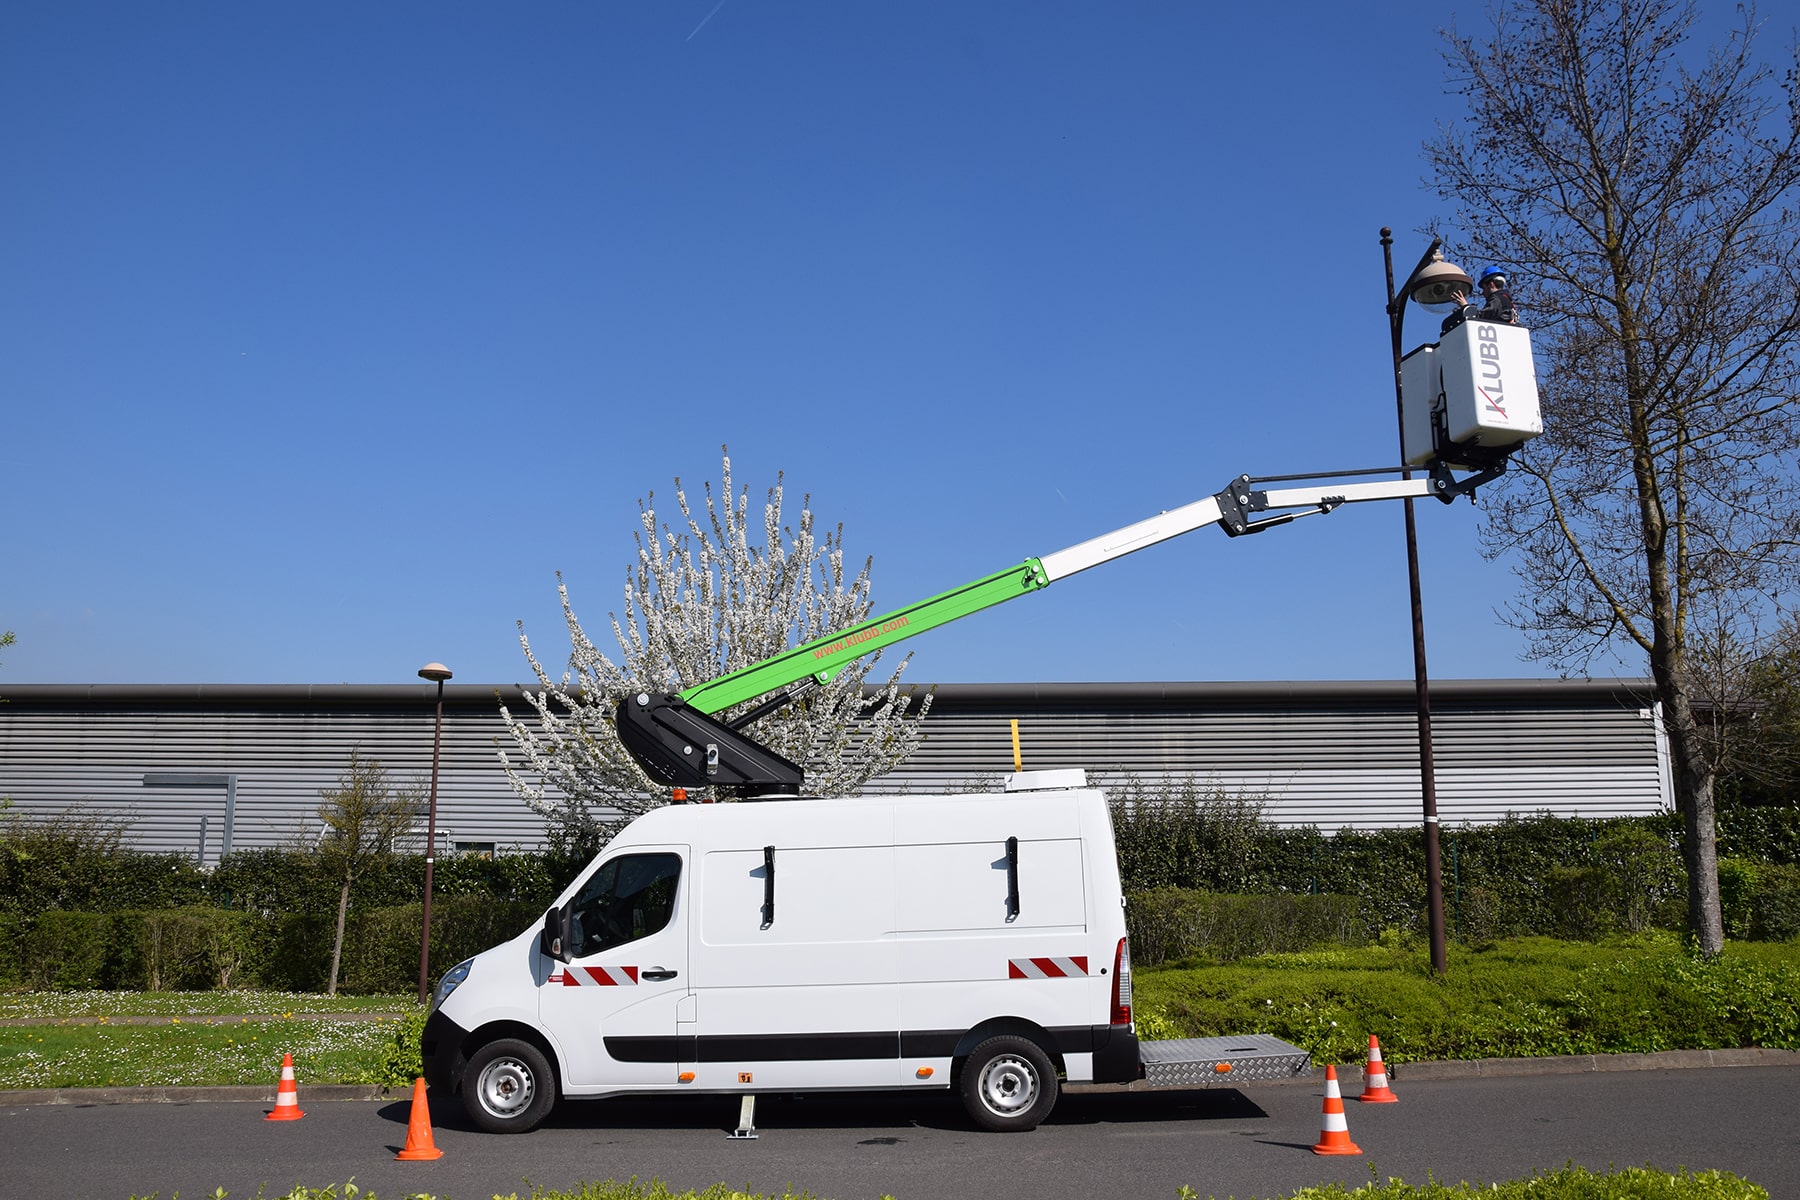 KLUBB aerial platforms care about the environment